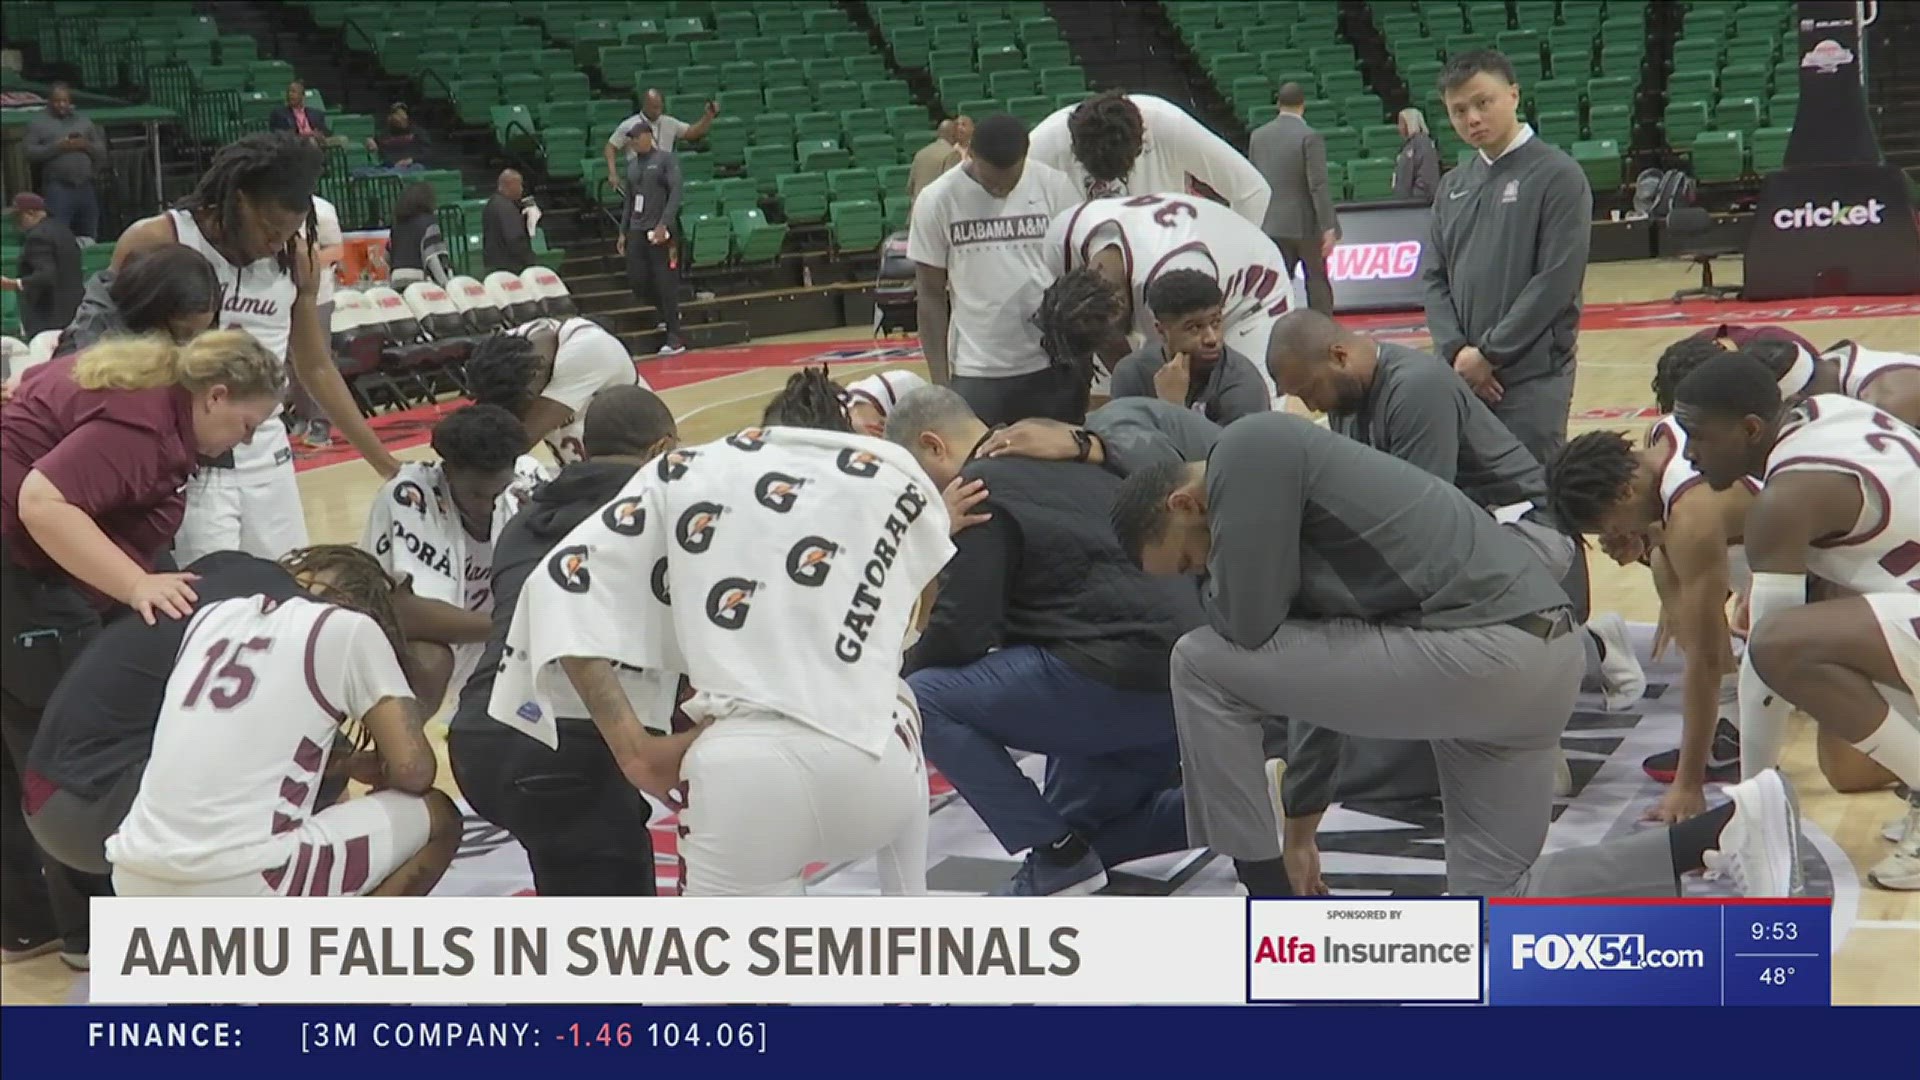 Led by PJ Henry's 26 points, the Texas Southern Tigers defeated the Alabama A&M Bulldogs 74-61 in the Southwestern Athletic Conference Tournament